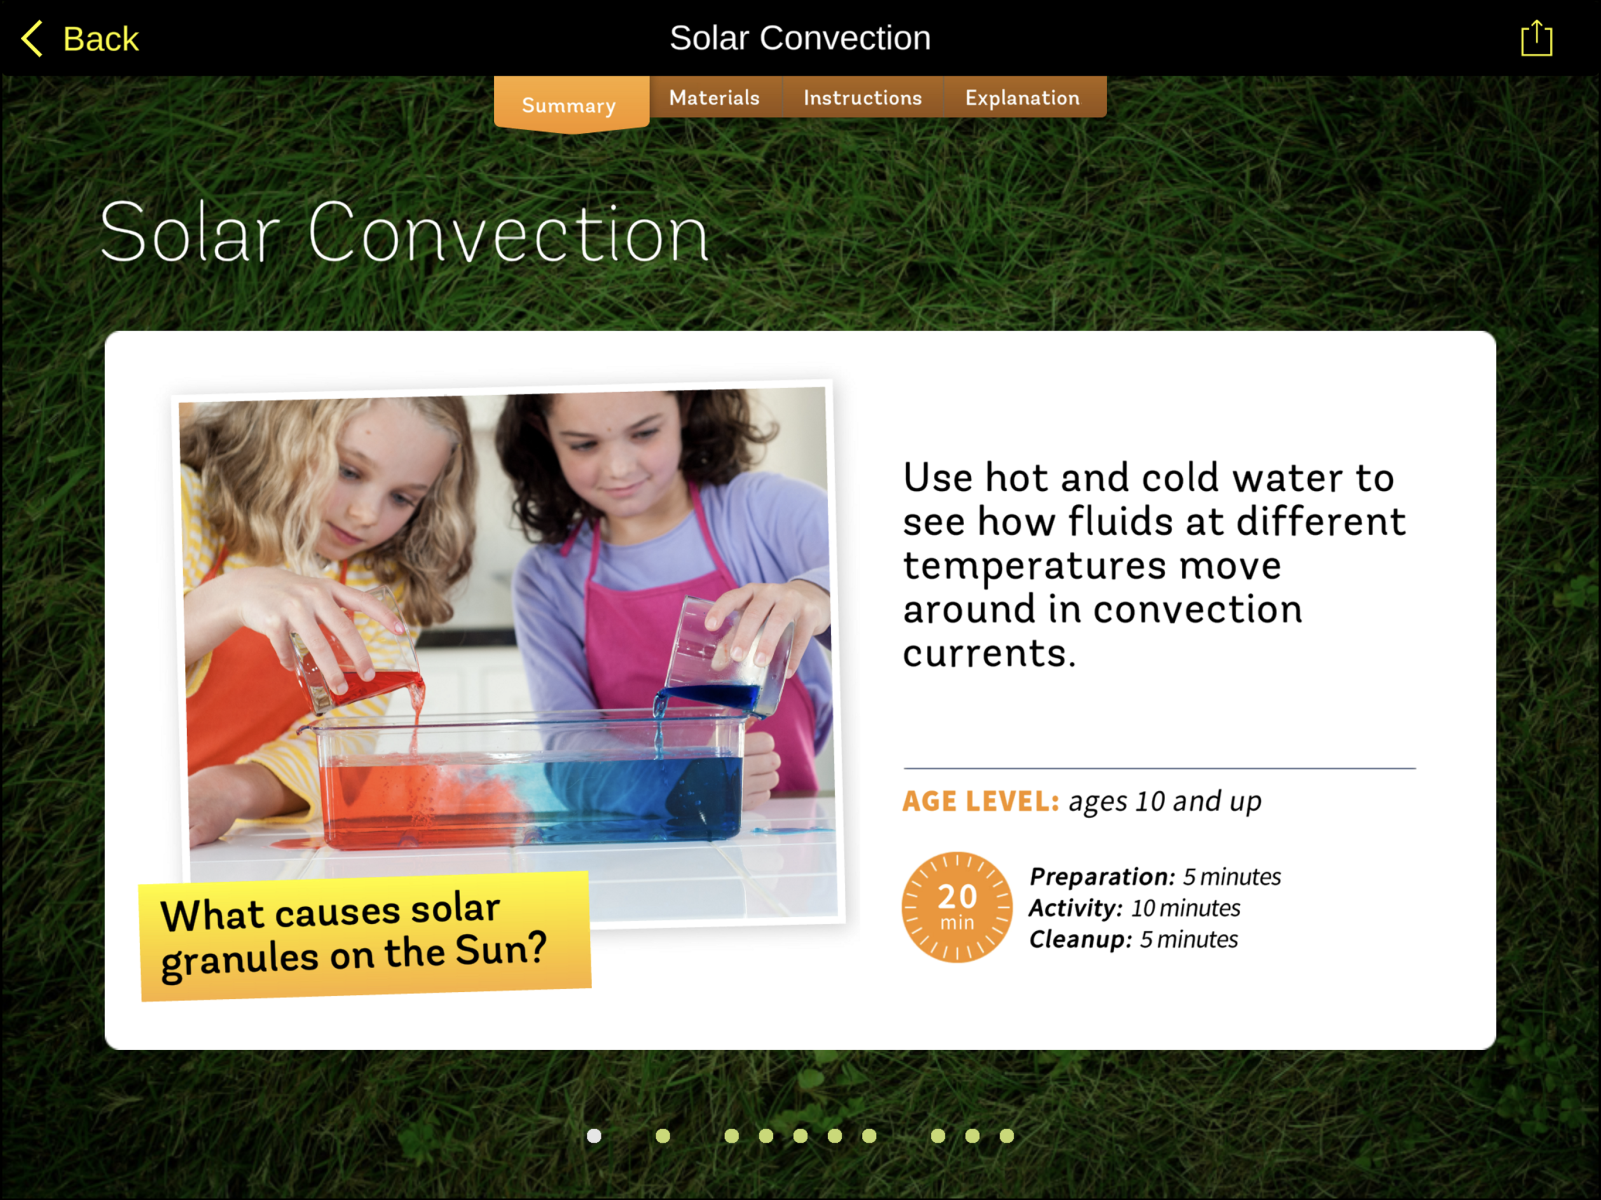 A hands-on activity in the DIY Sun Science app